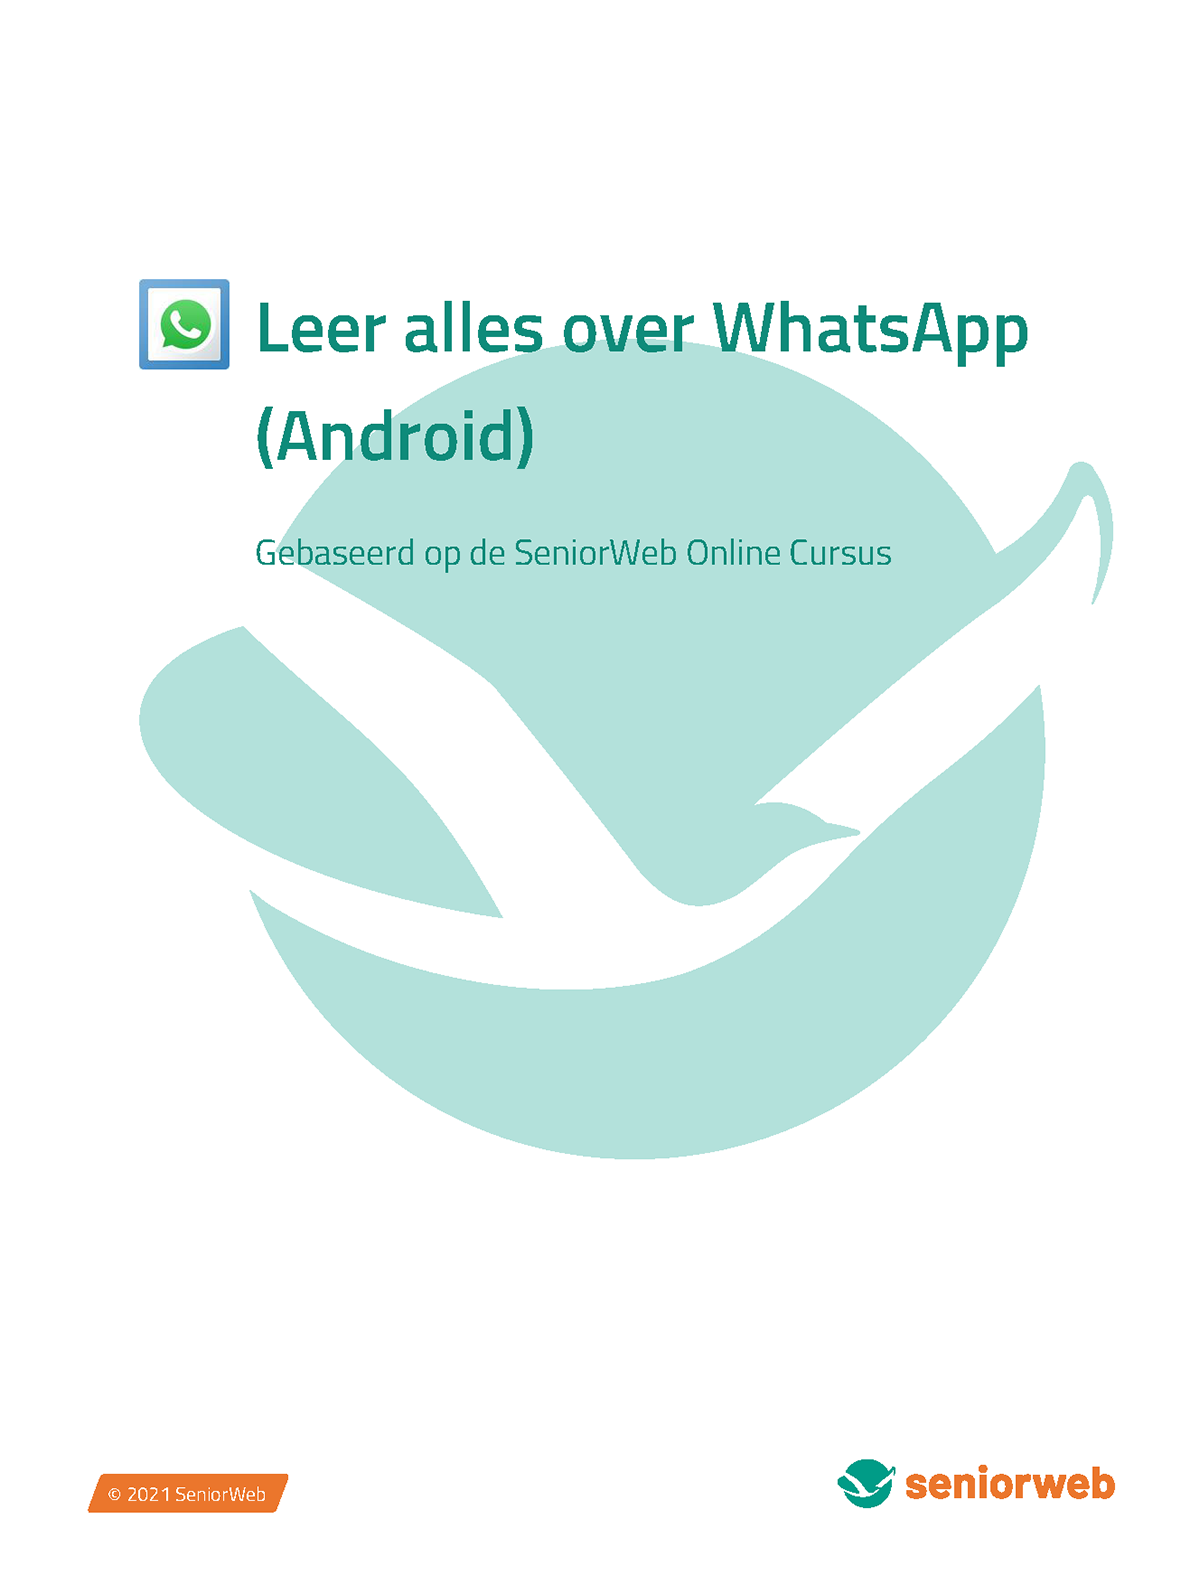 Cursus - Leer alles over WhatsApp (Android)